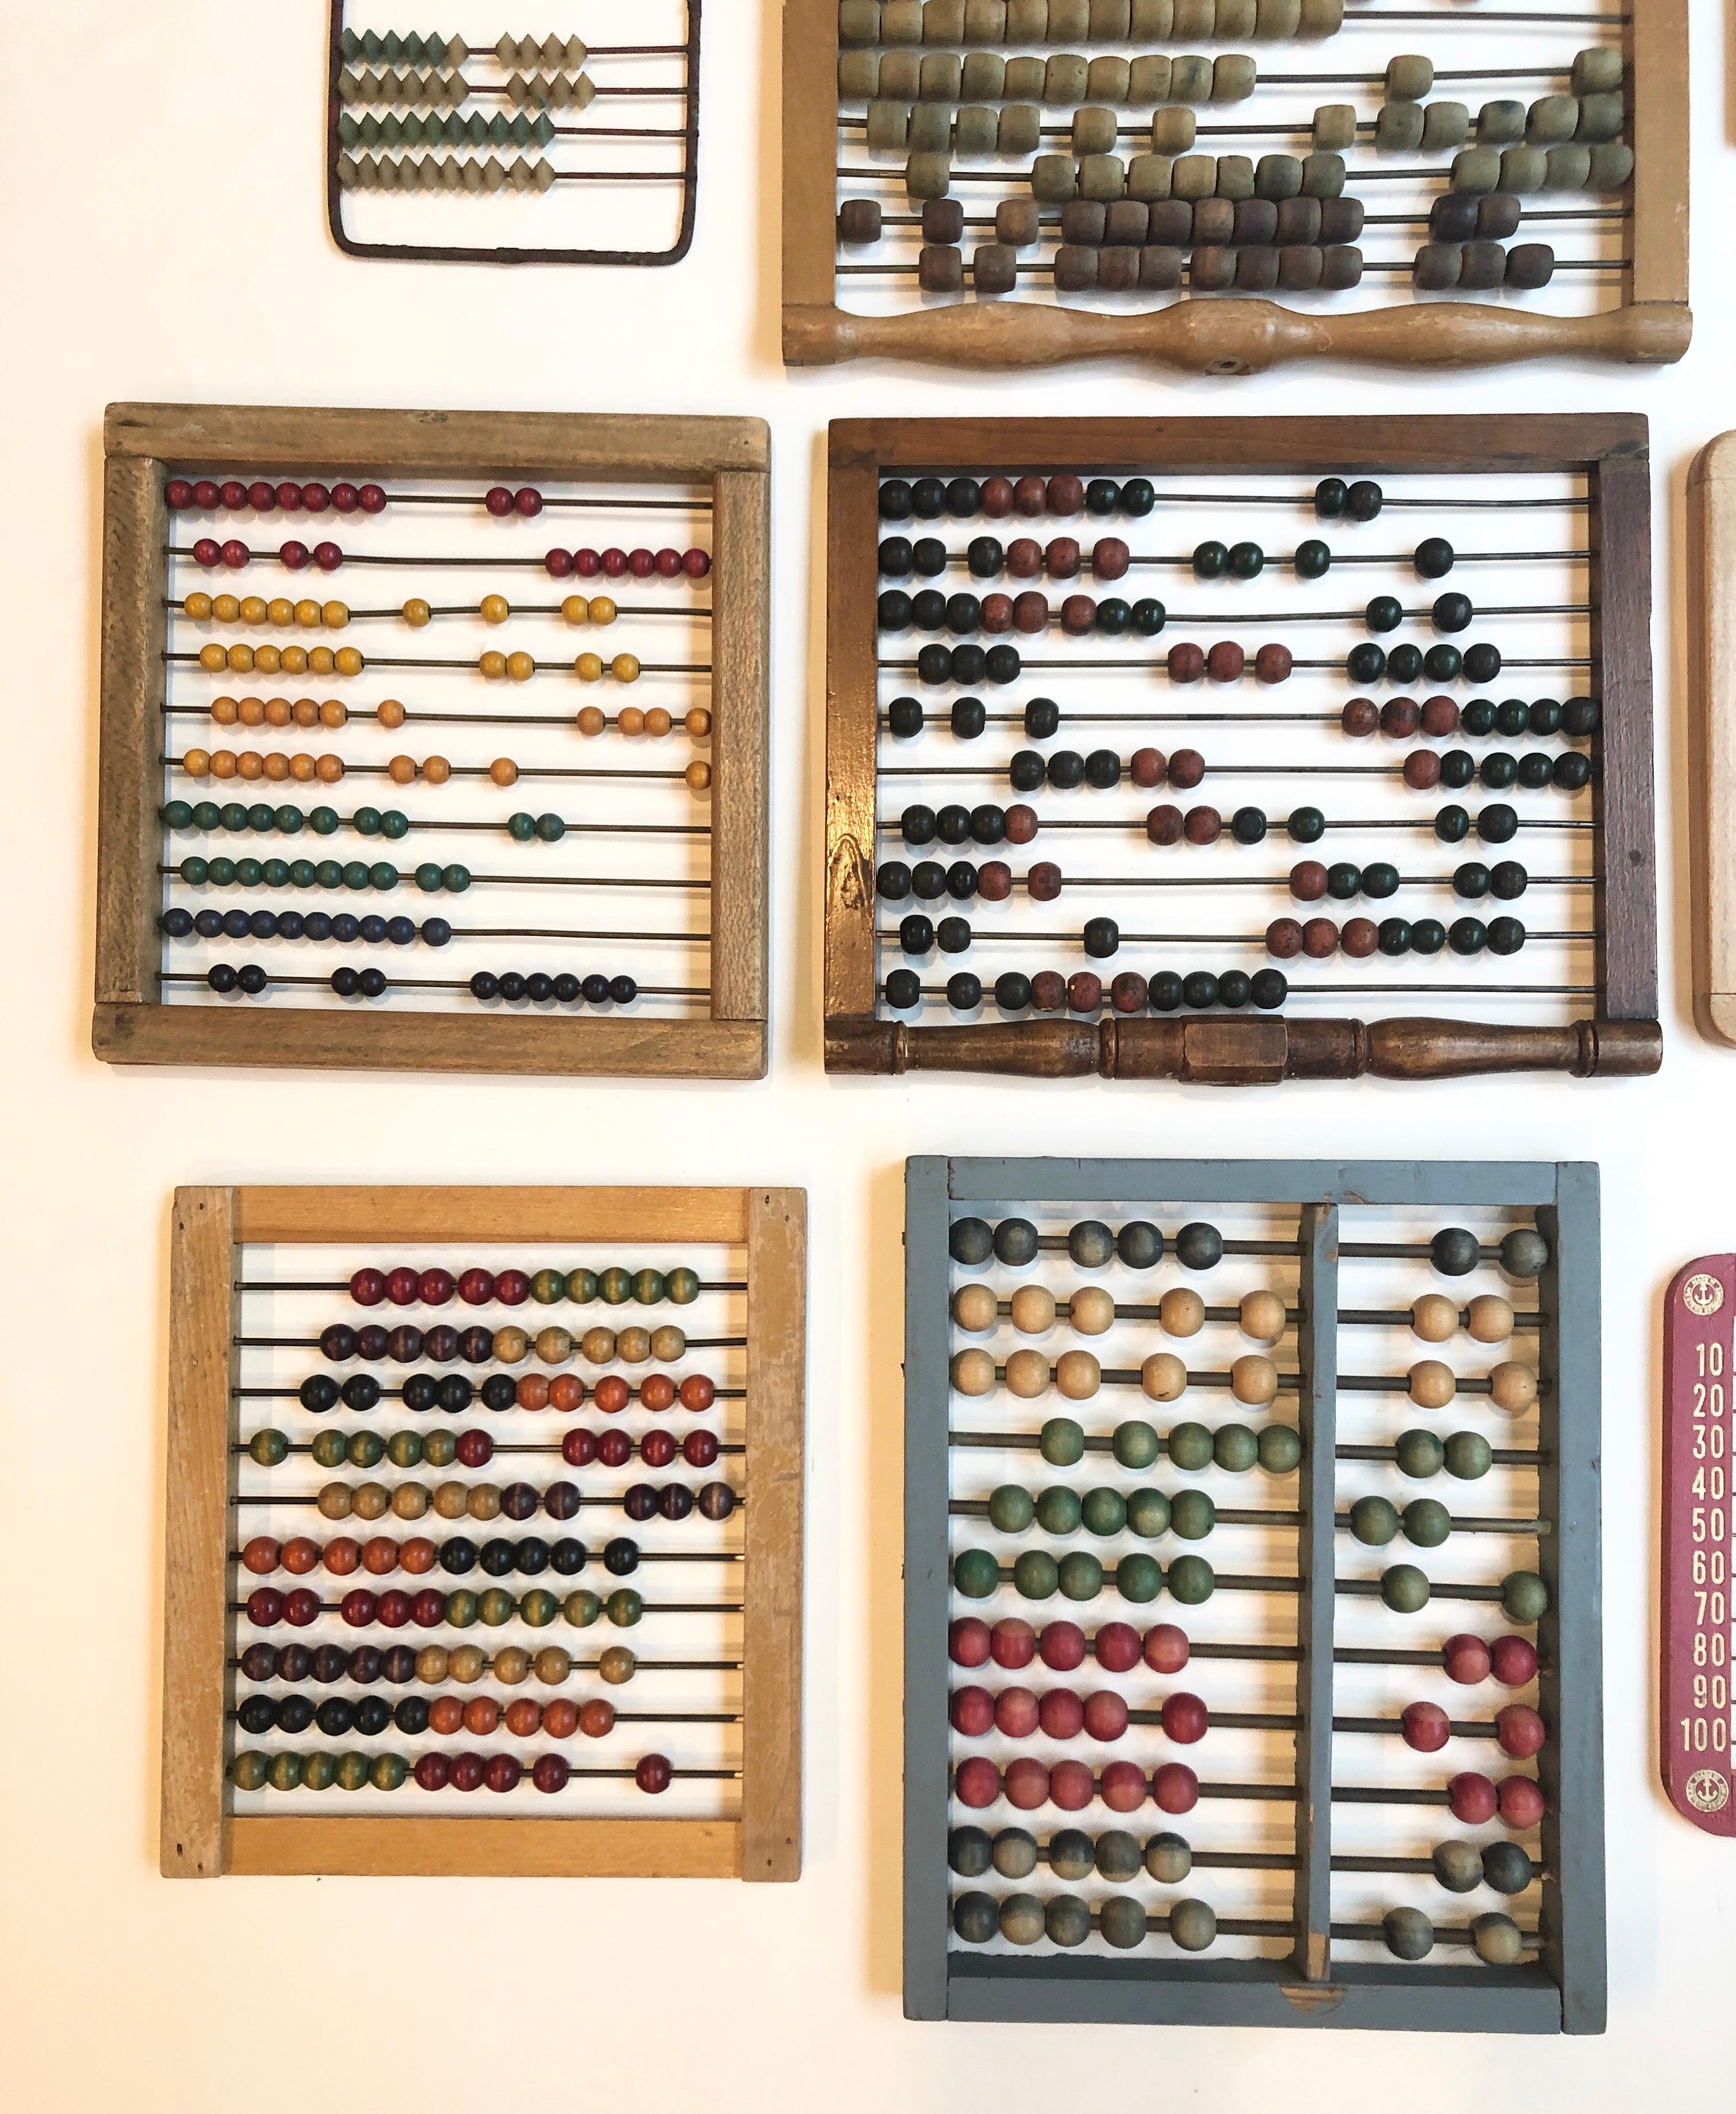 Mid-20th Century Vintage and Antique Colorful Child’s Abacus Collection